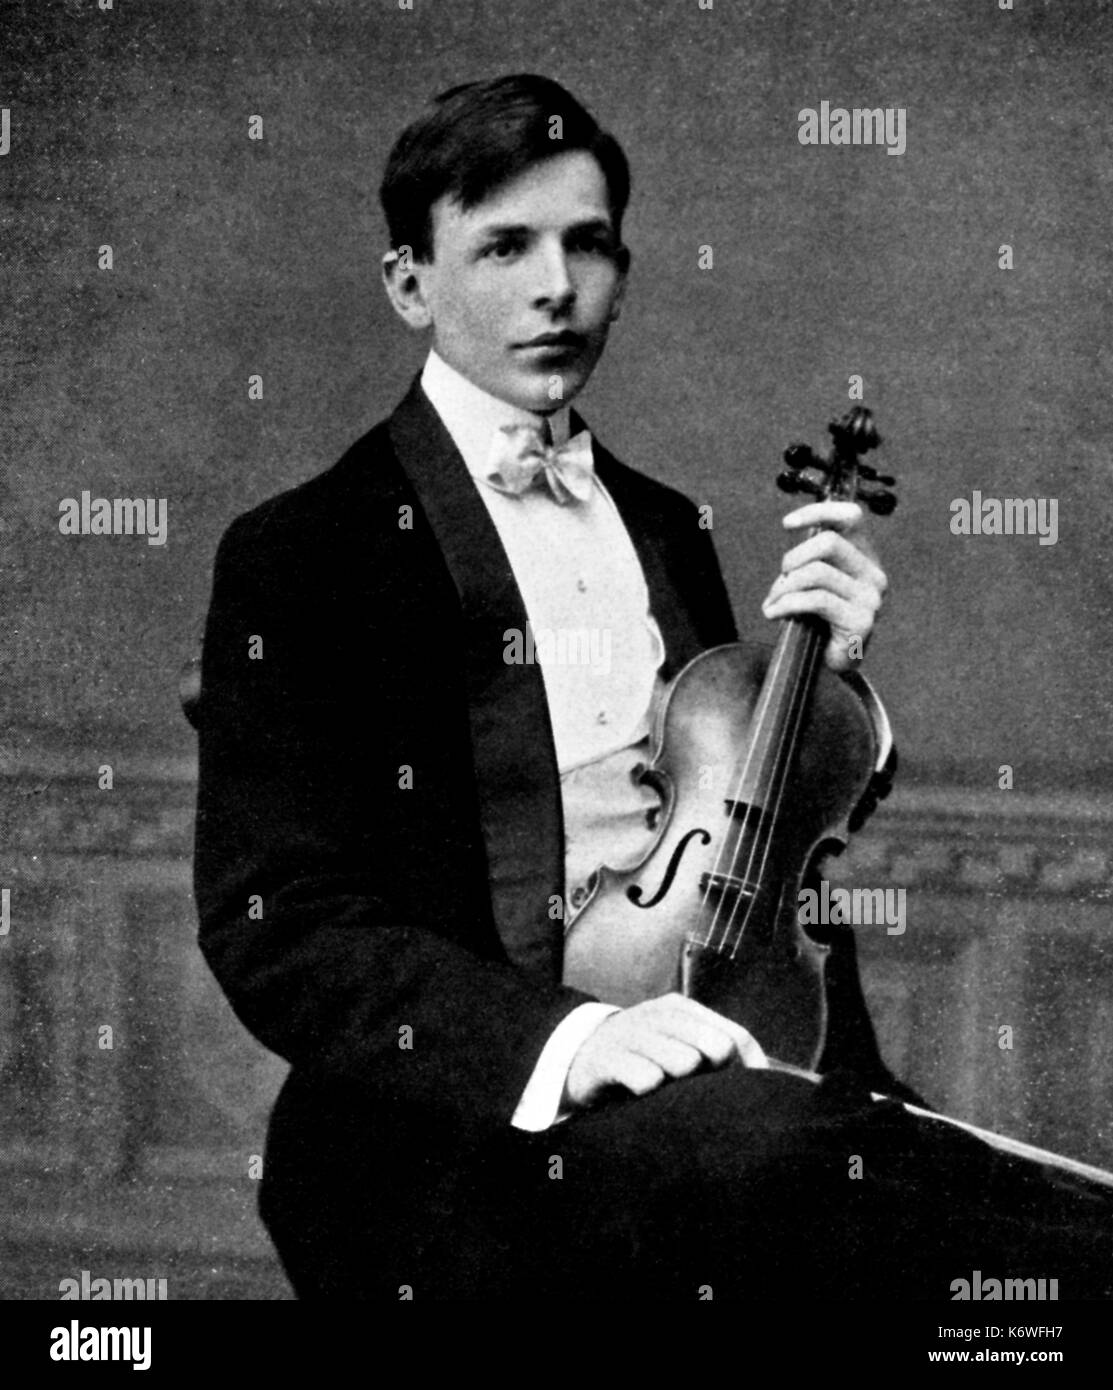 SPALDING, Albert - young, holding violin American Violinist and Composer, 1888-1953 Stock Photo